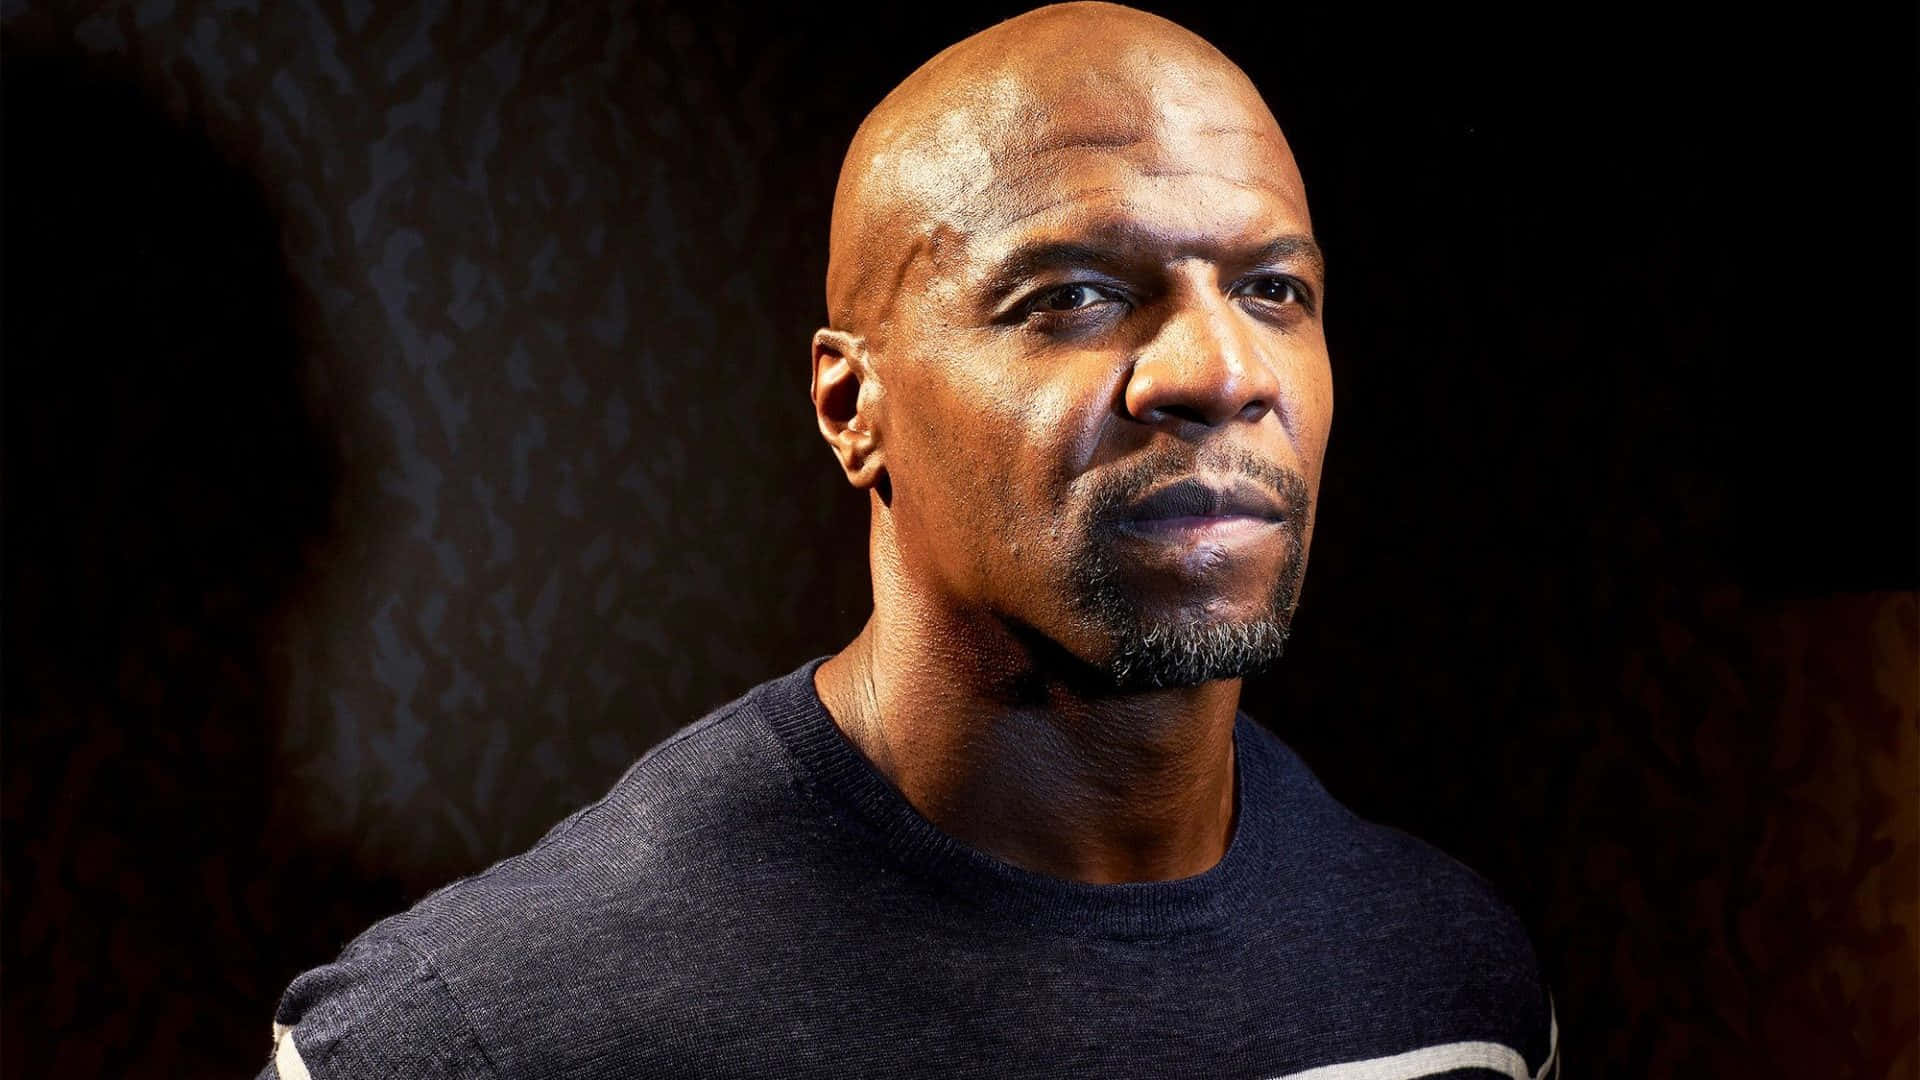 Actor, Host and Former NFL Player Terry Crews Wallpaper